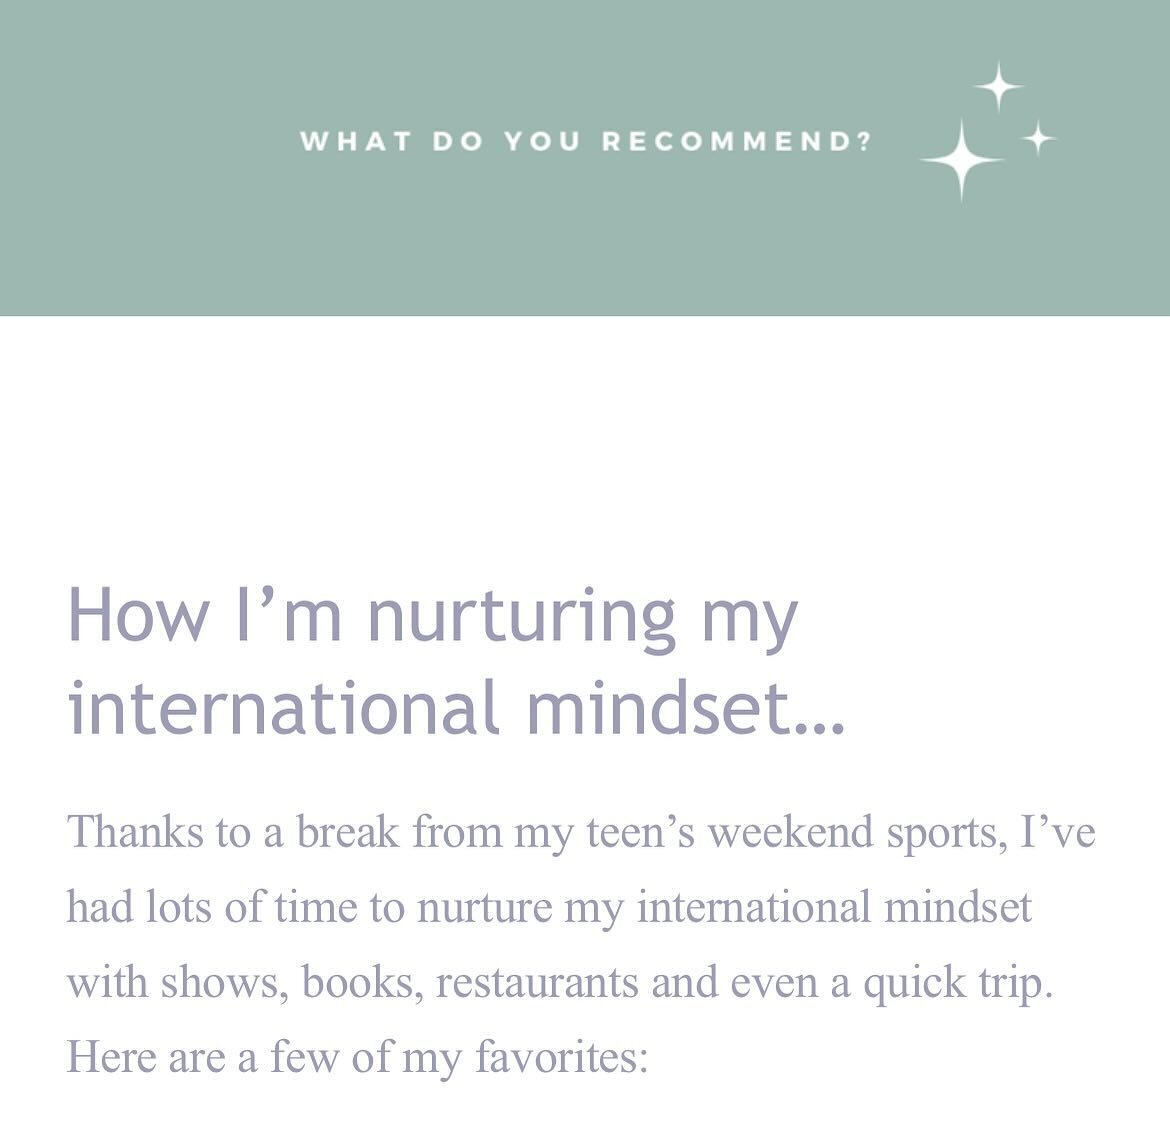 Did you receive our April newsletter in your inbox yesterday?

If not, DM me and I&rsquo;ll add you to the list. 

One of the highlights this month is an overview of how I&rsquo;ve been nurturing my international mindset as a repat. Take a look and s